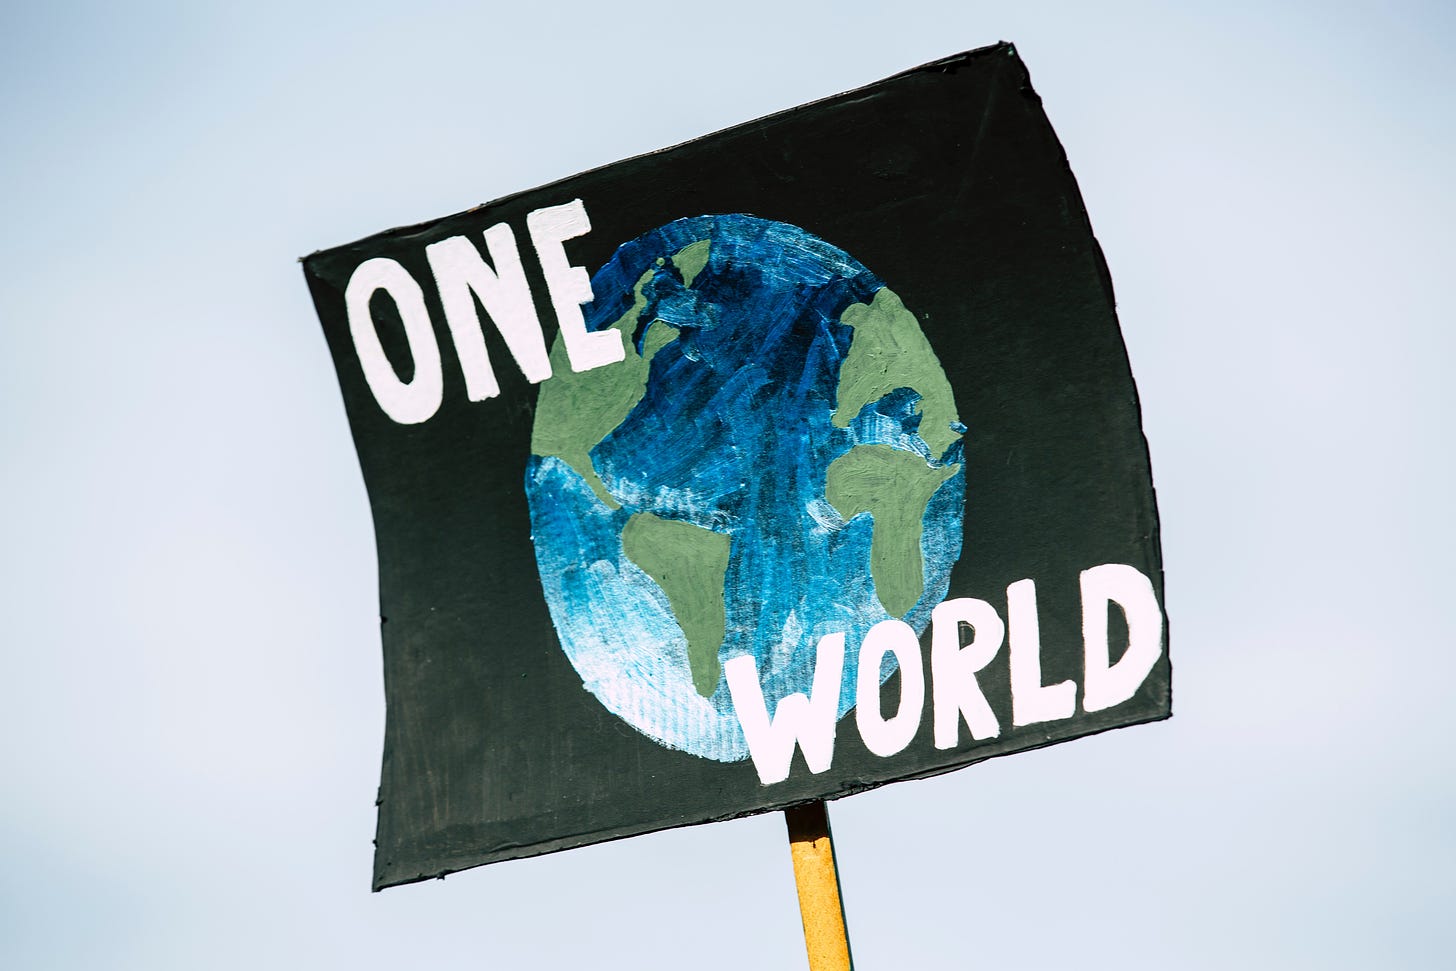 A placard with a drawing of the earth and "one world" written on it